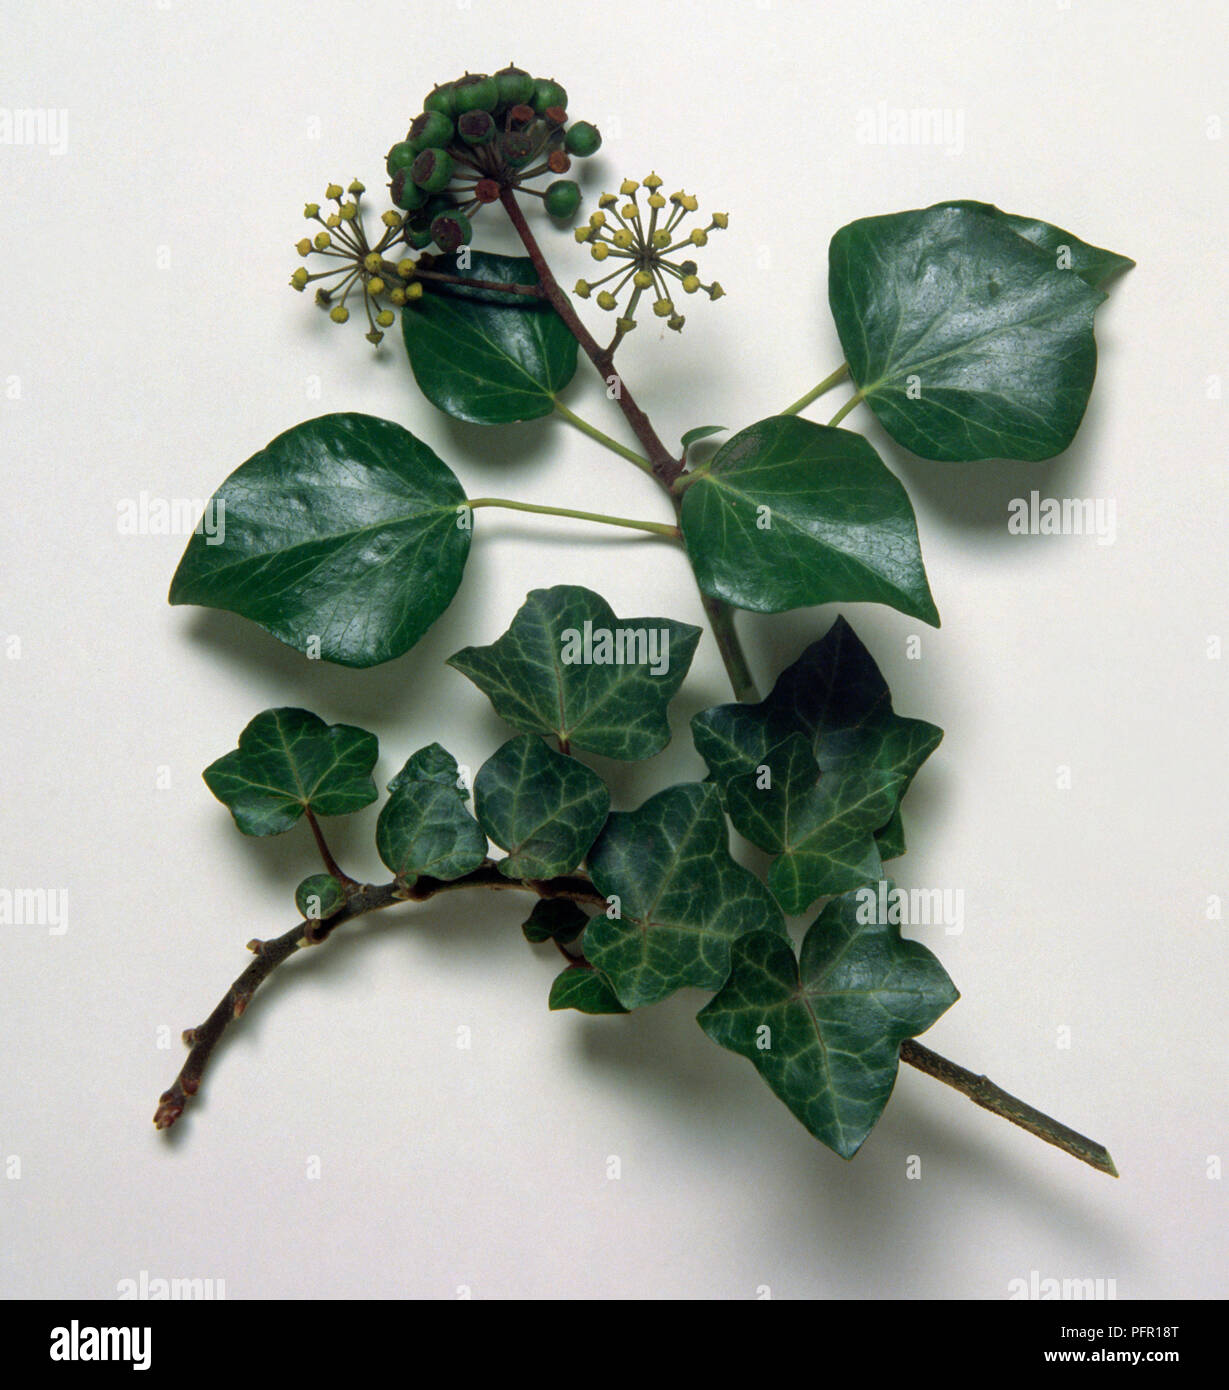 Hedera helix (Common ivy), stem with leaves, flowers and berries Stock Photo